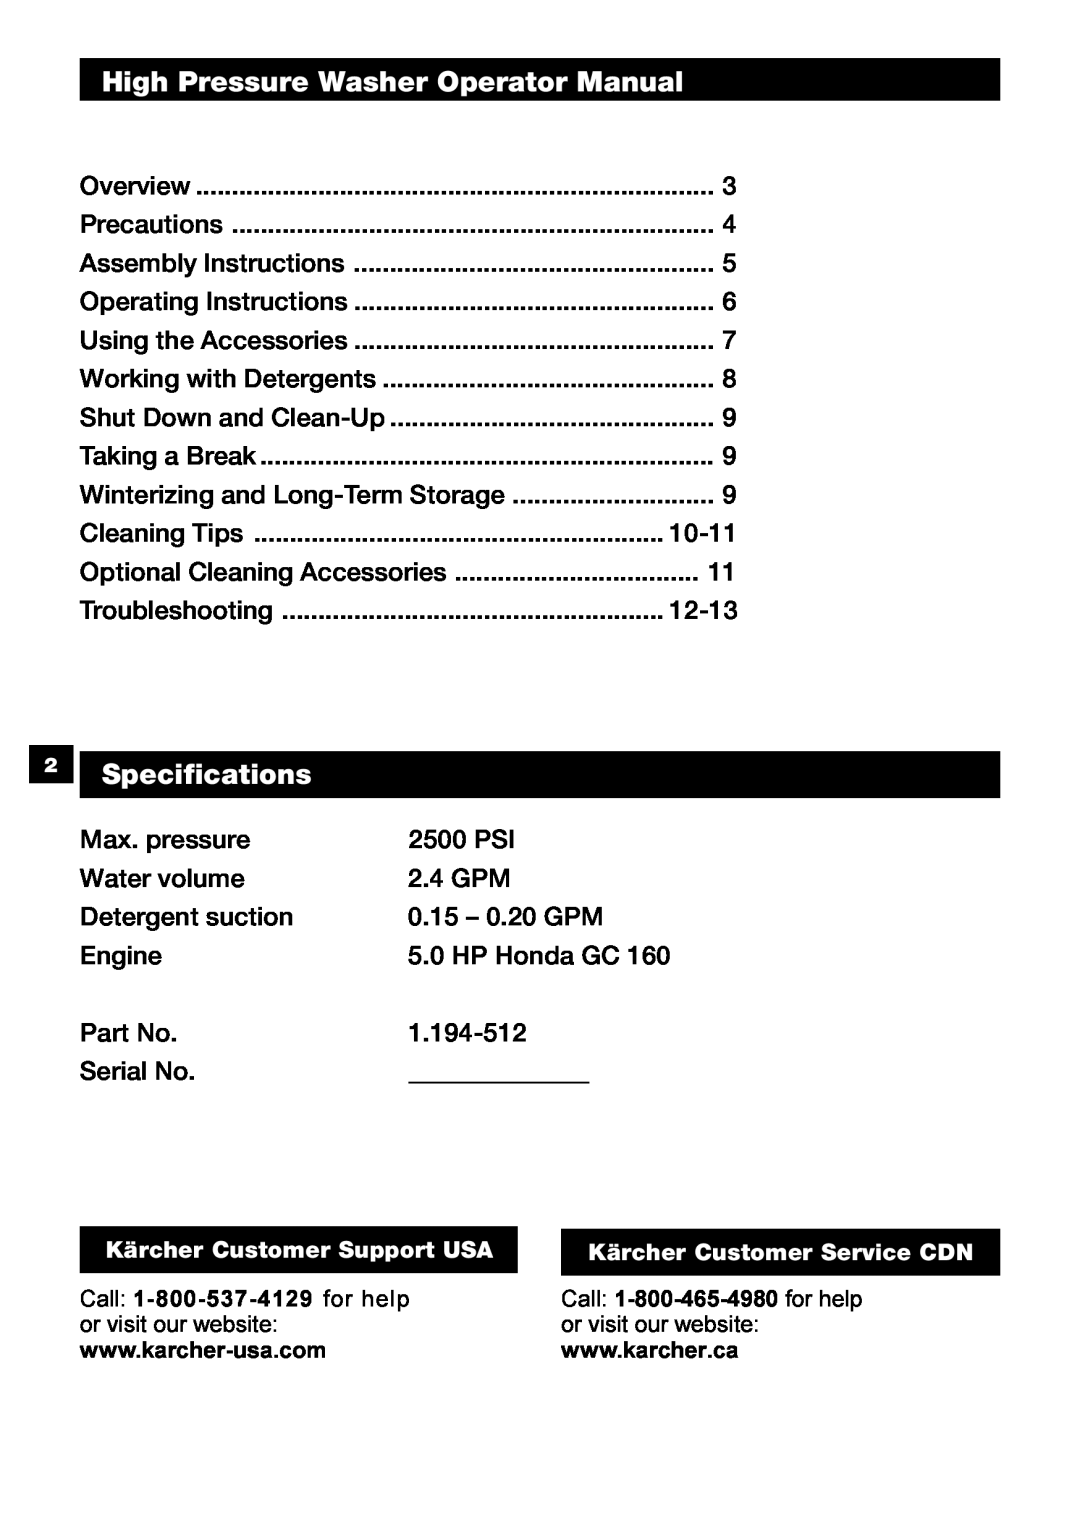 Karcher G 2500 OH manual High Pressure Washer Operator Manual, Specifications 